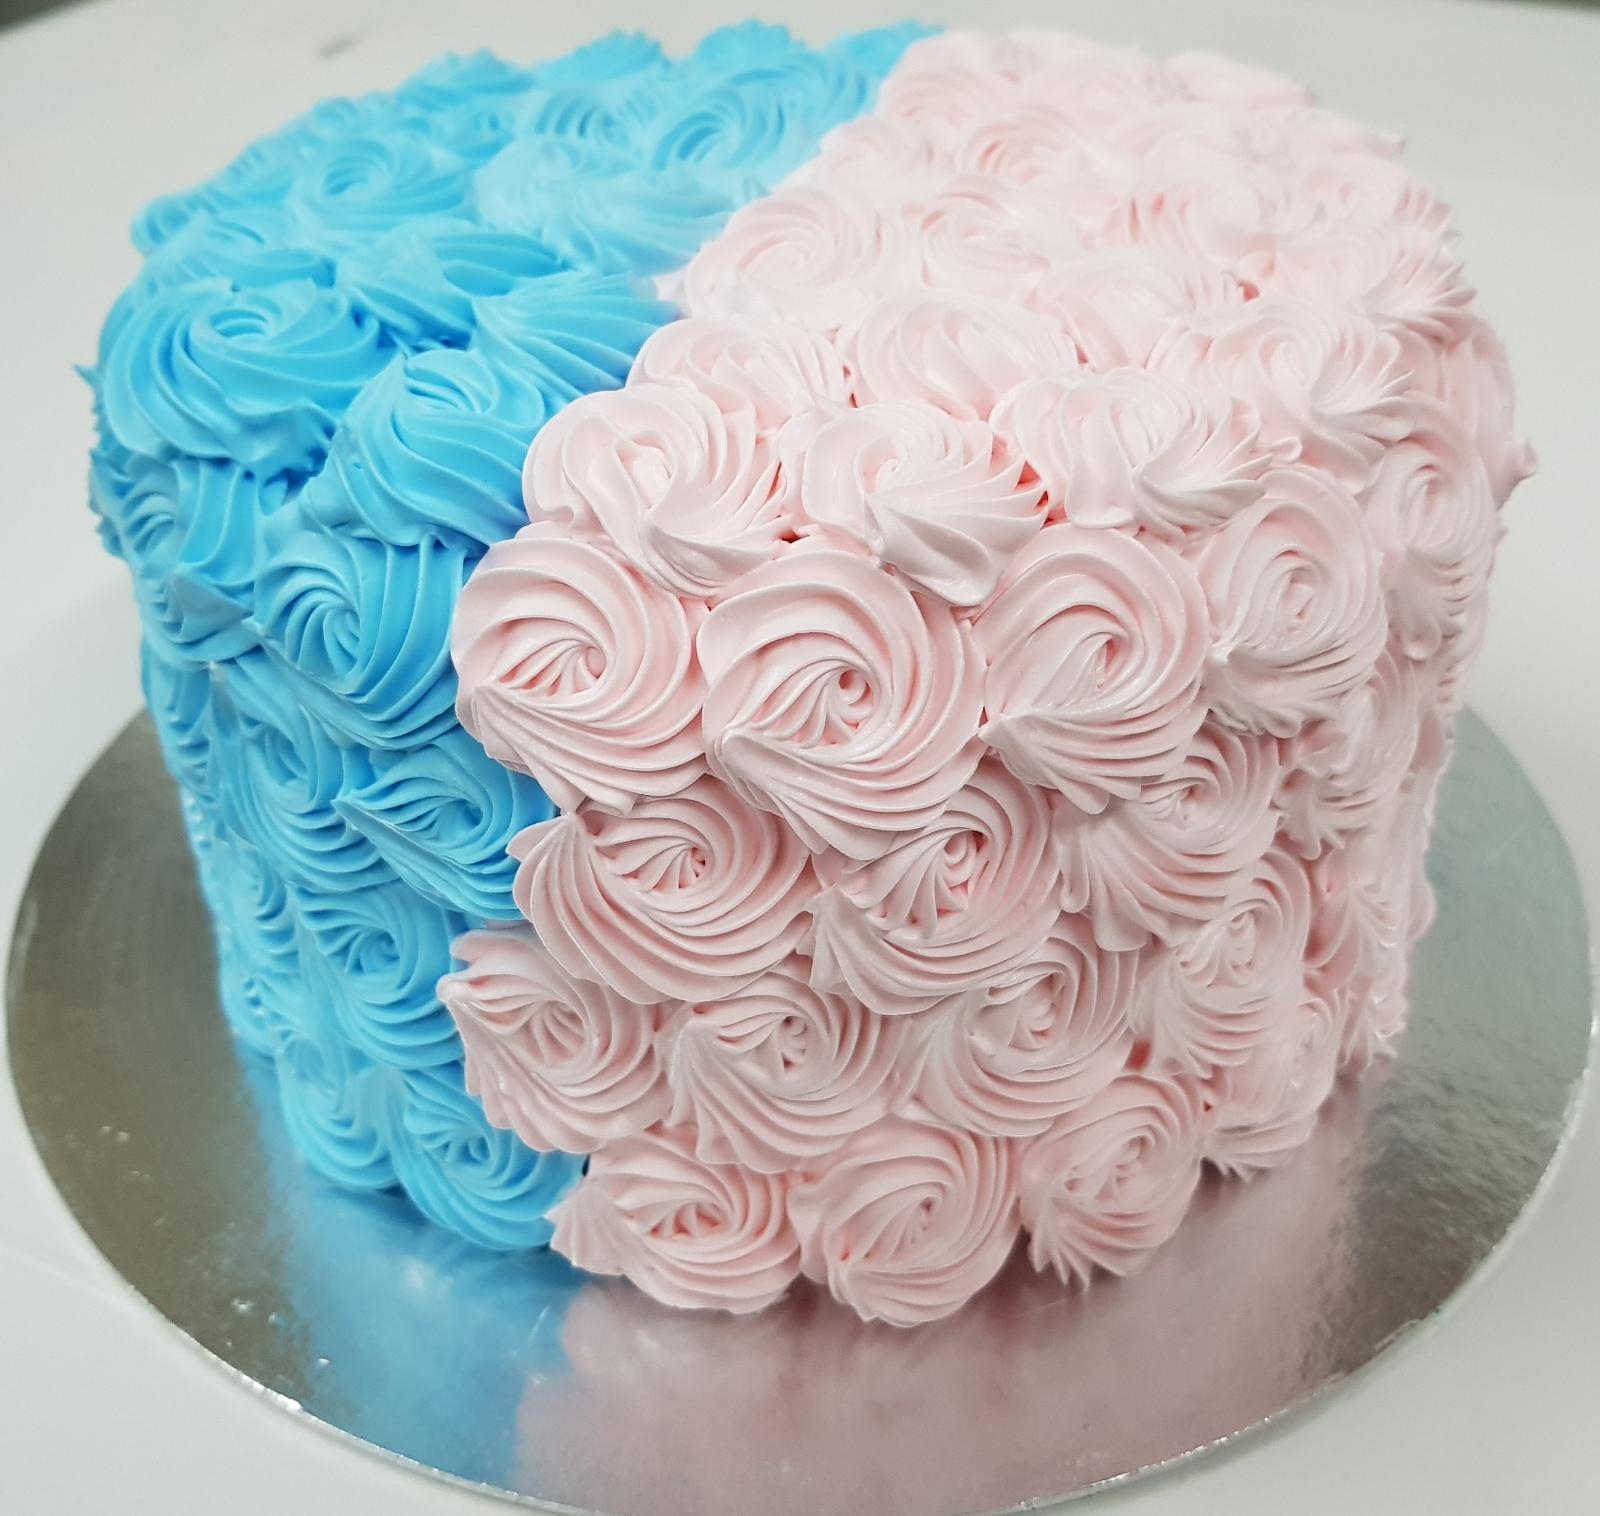 142,556 Pink Blue Cake Images, Stock Photos & Vectors | Shutterstock